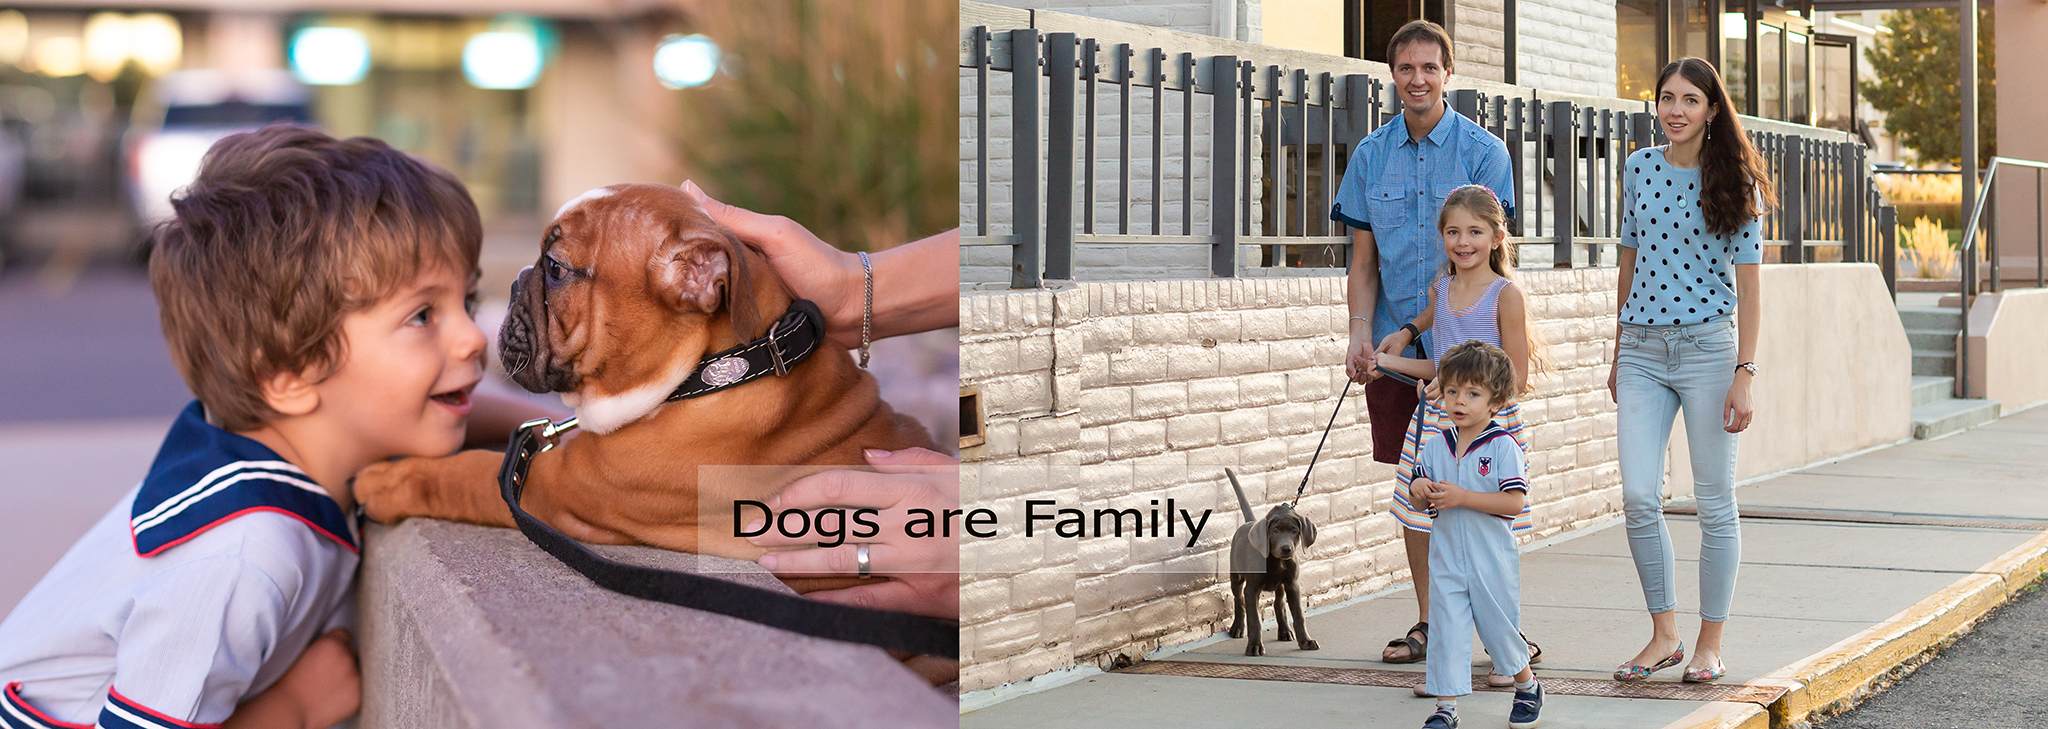 Dogs are Family